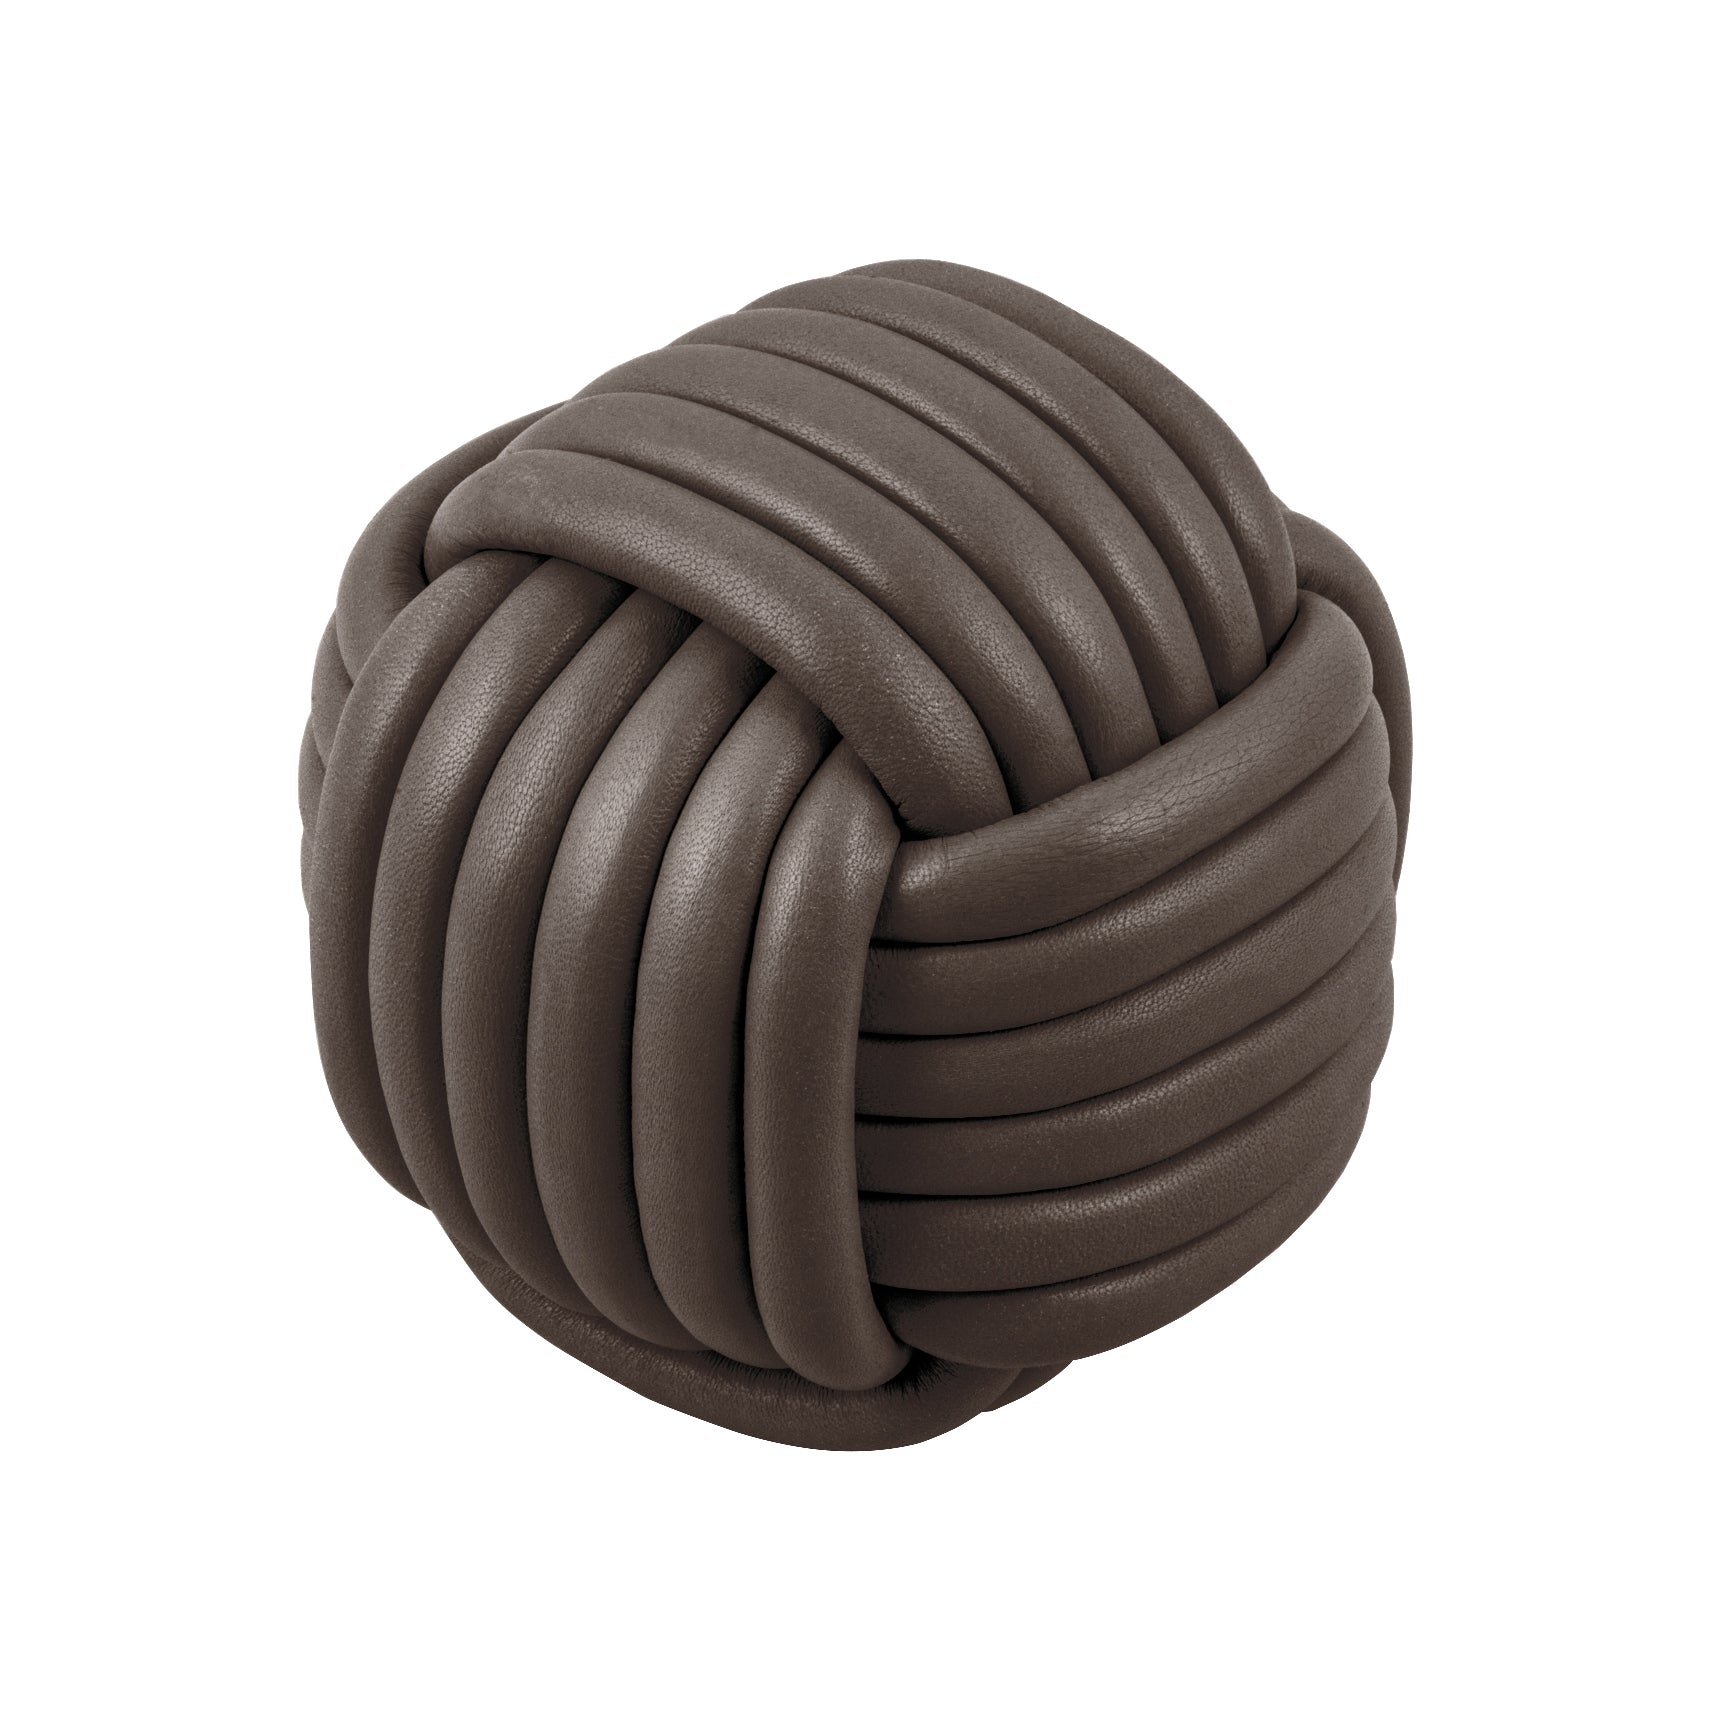 Giobagnara Nodo Nappa Leather Doorstop | Elegant Nappa Leather Design | Available in a Selection of Nappa Leather Finishes | Very Stable Construction | "Nodo" Means "Knot" in Italian | Explore a Range of Luxury Home Accessories at 2Jour Concierge, #1 luxury high-end gift & lifestyle shop